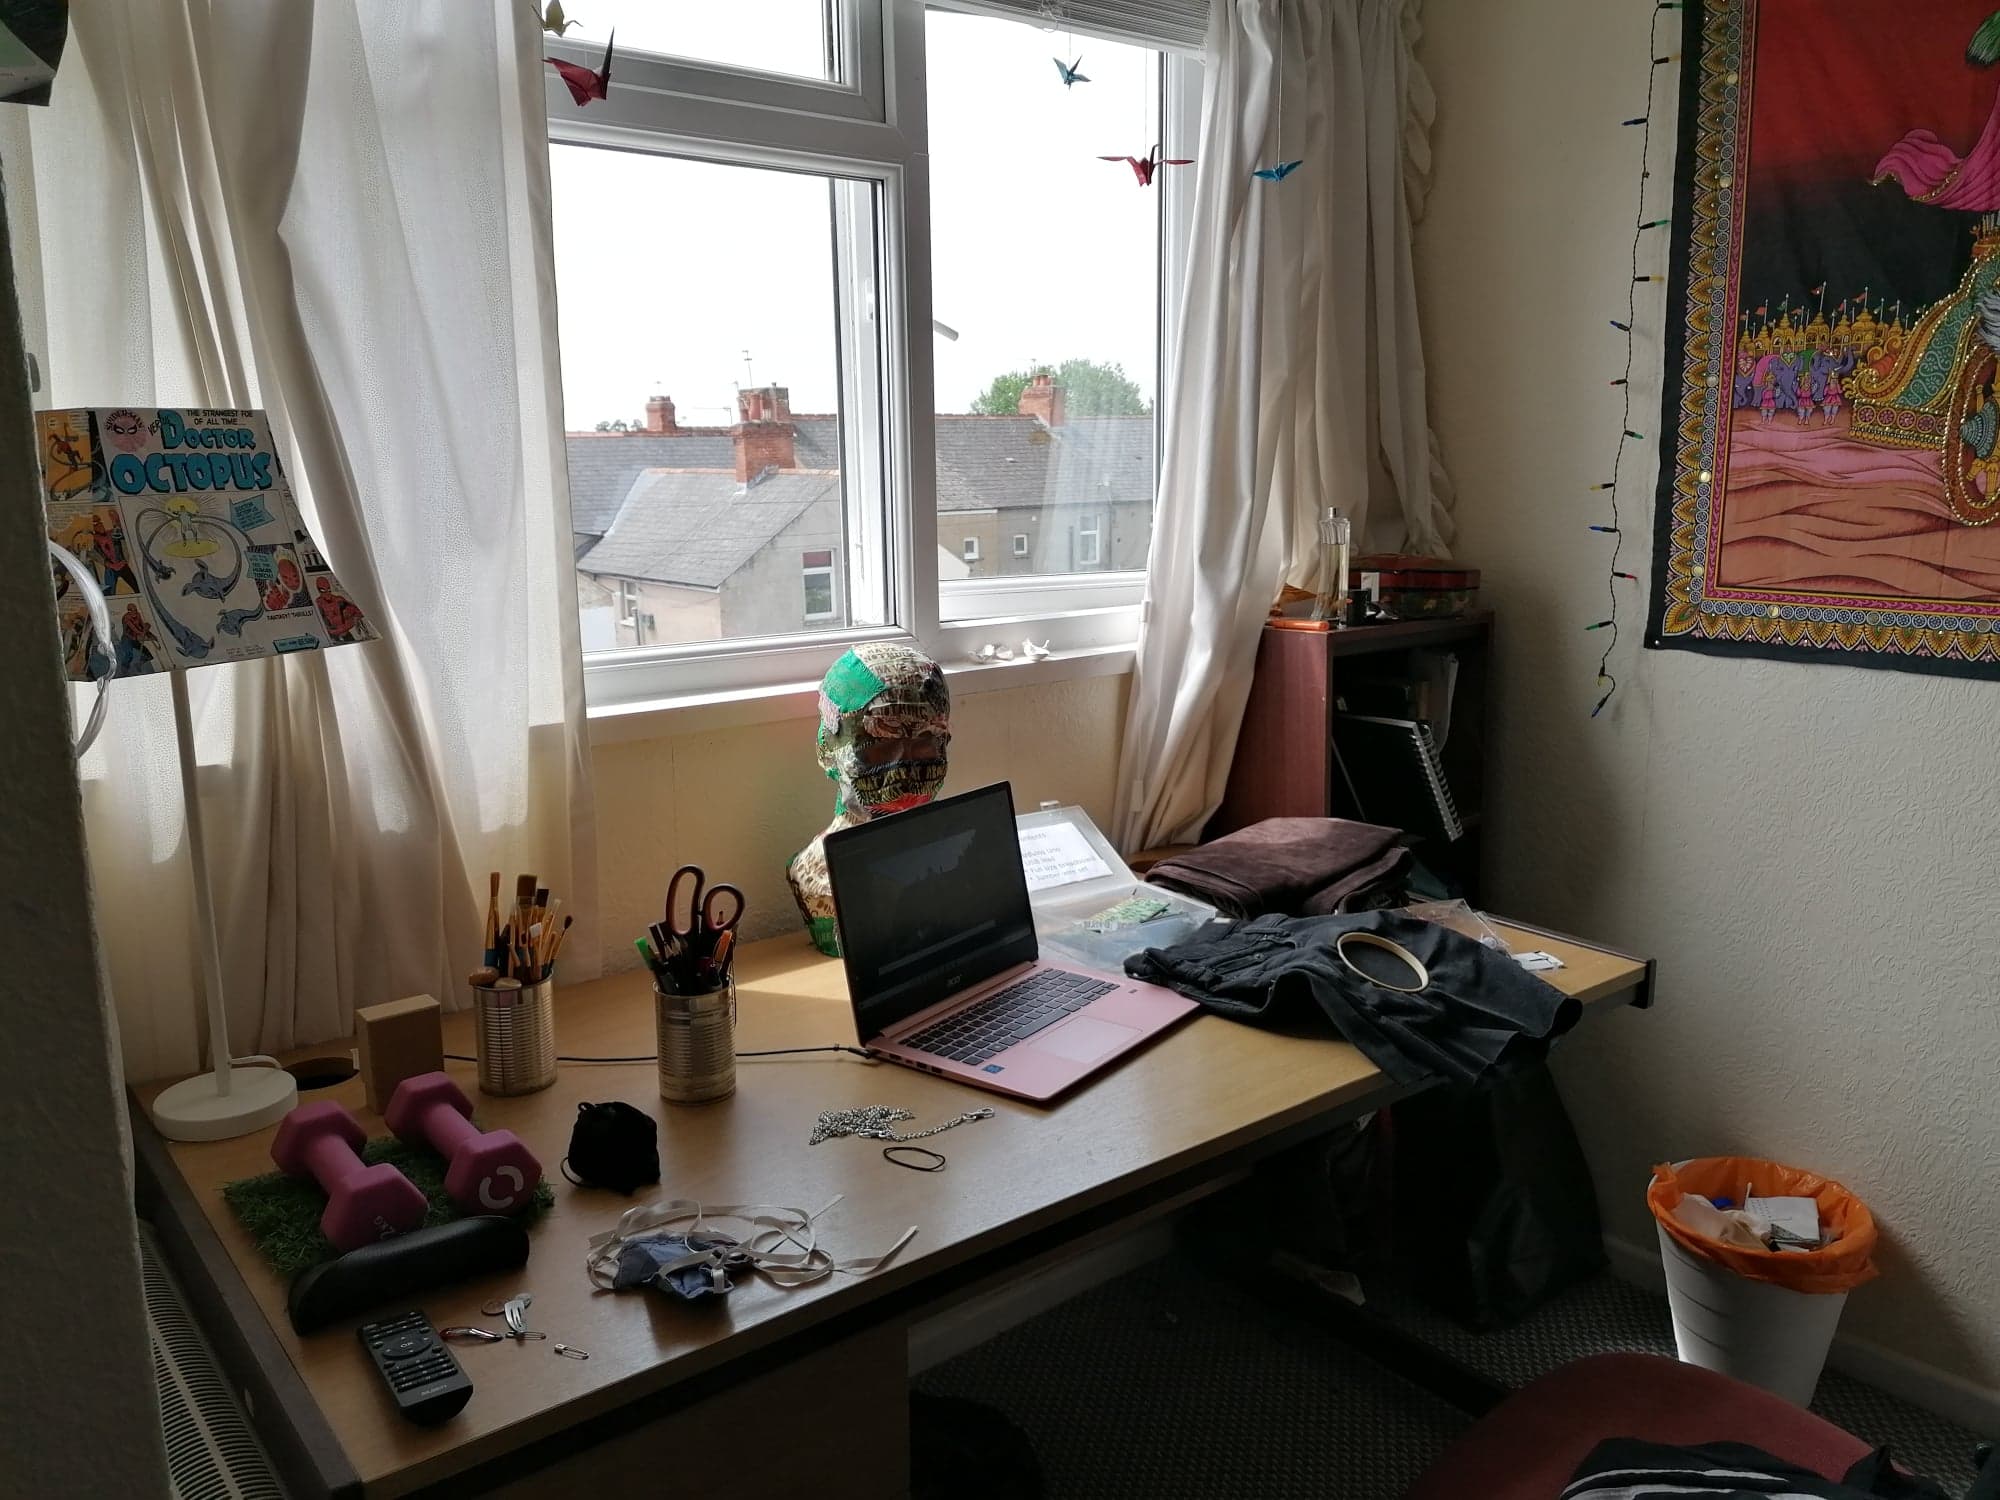 An image of Martha's workspace. A desk in front of a window. A laptop and embroidery tools are on the desk.